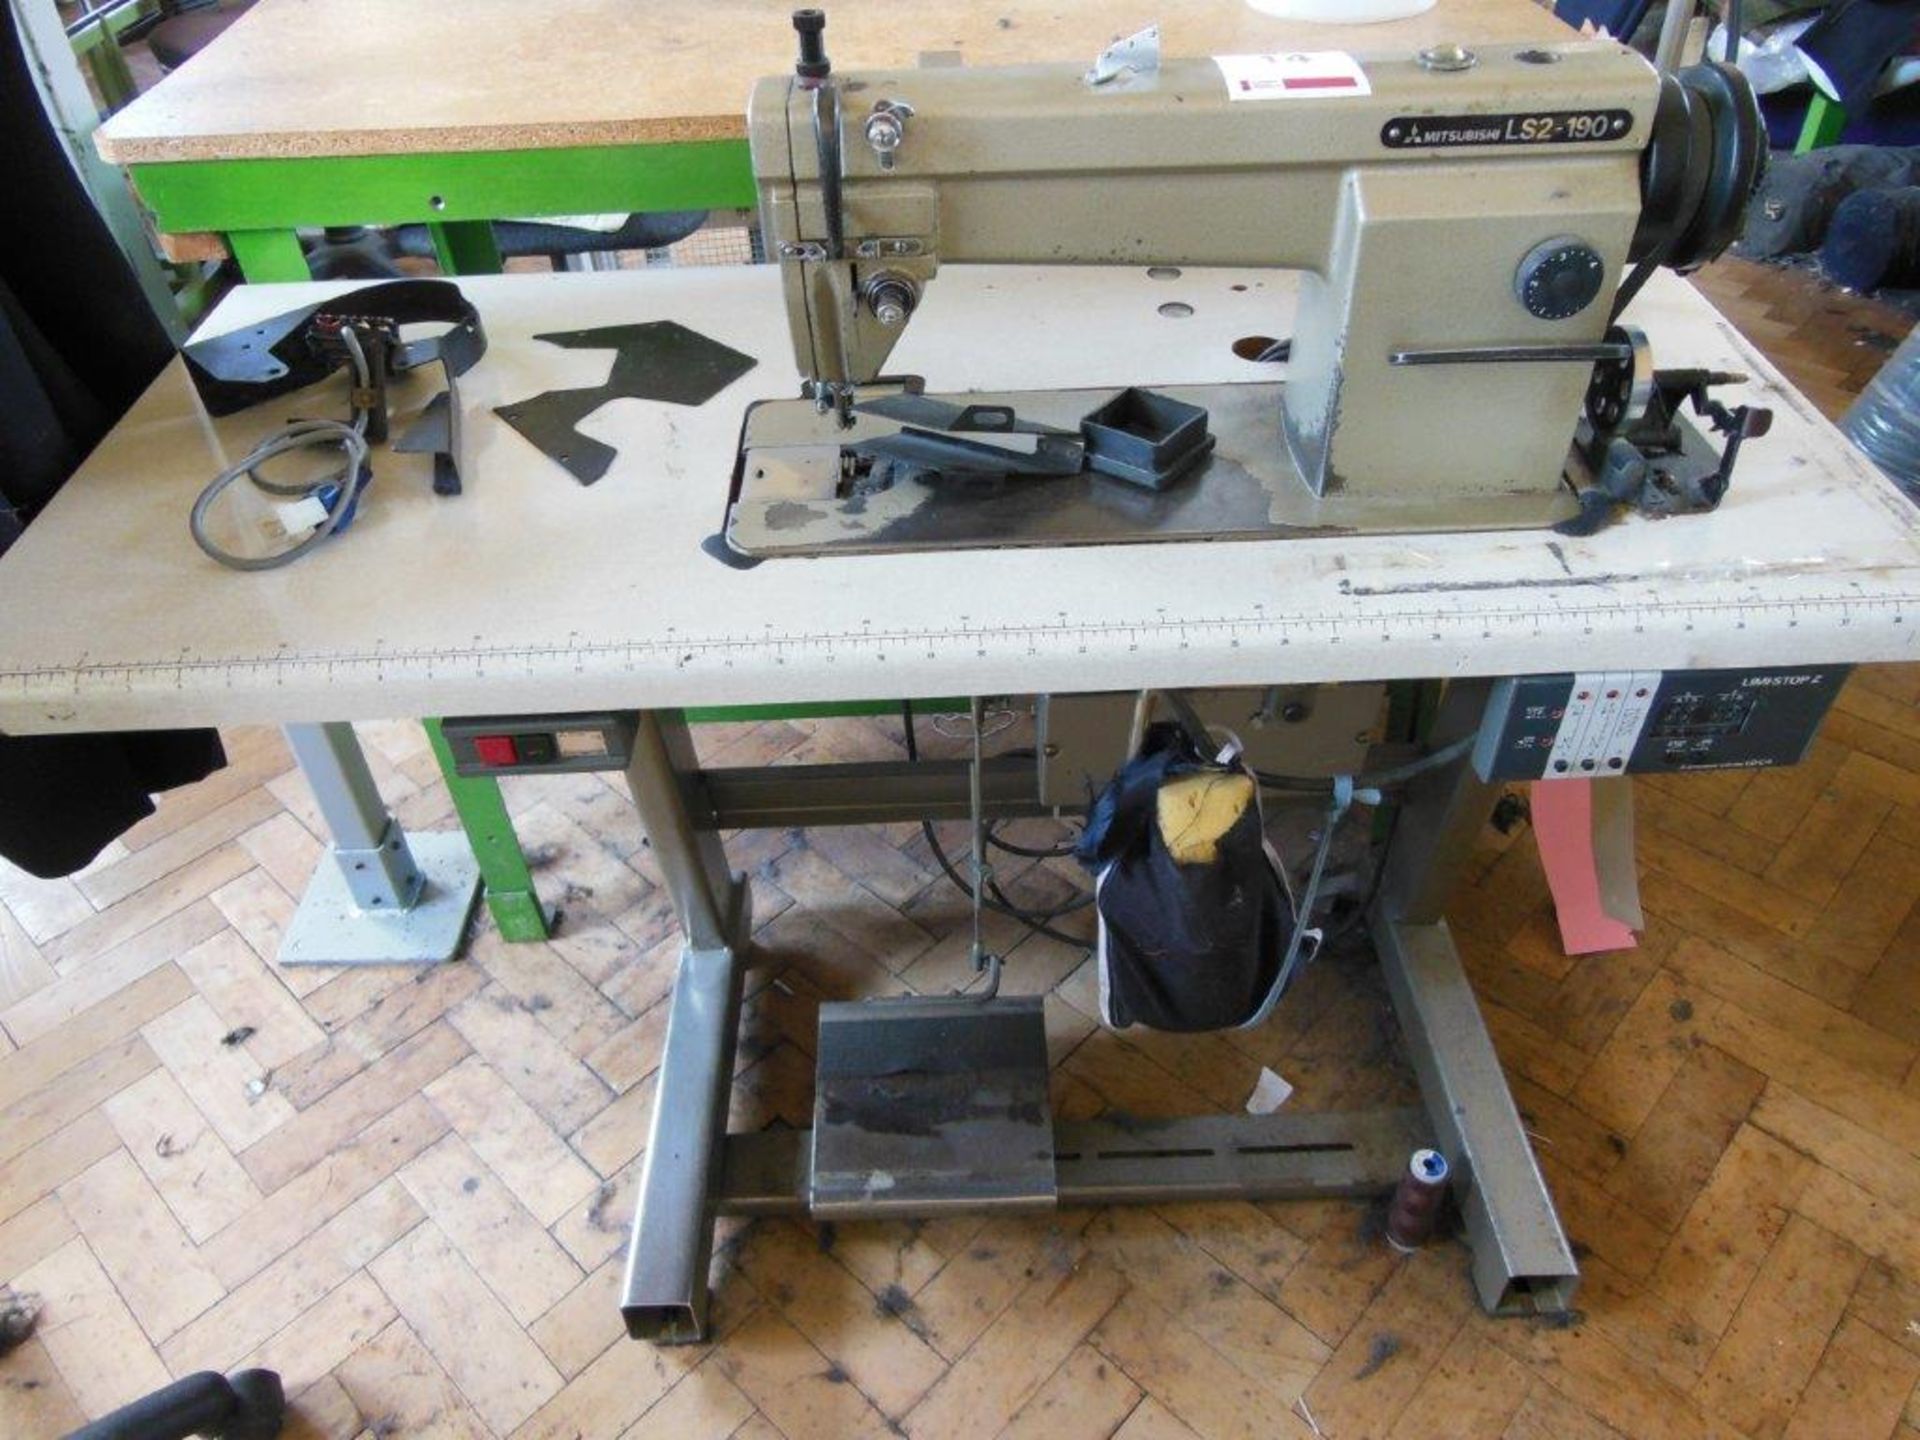 Mitsubishi LS2-190 industrial flatbed sewing machine, three phase. NB: this item has no CE marking.